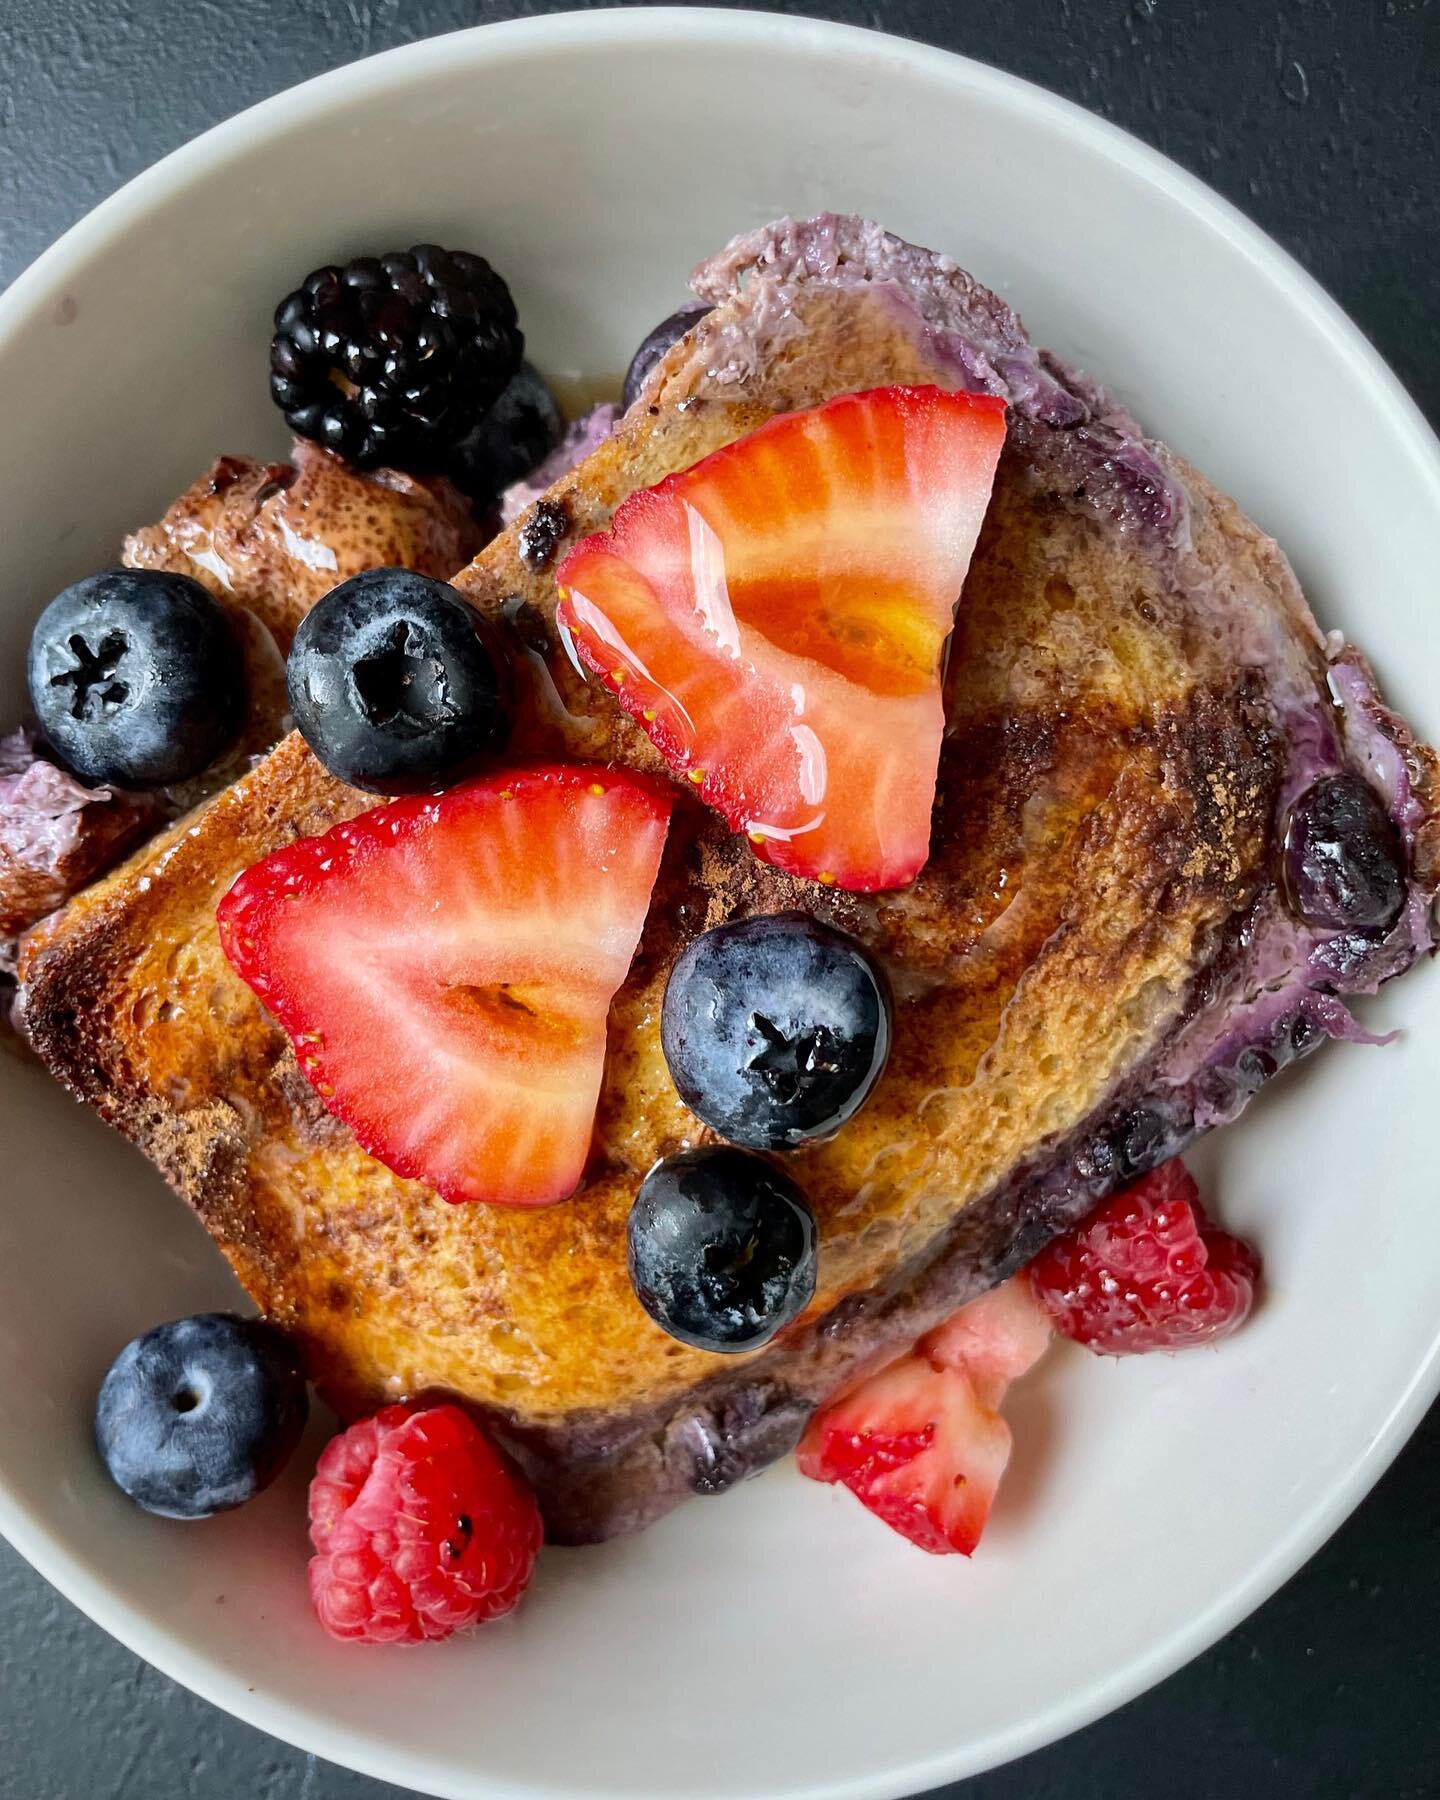 HIGH PROTEIN OVERNIGHT BLUEBERRY FRENCH TOAST
⠀⠀⠀⠀⠀⠀⠀⠀⠀
Bread &amp; blueberries soaked overnight in a sweet creamy egg mixture then baked up to golden &amp; gooey perfection in the morning?!? Not a bad way to kick off the weekend!
⠀⠀⠀⠀⠀⠀⠀⠀⠀
Good news